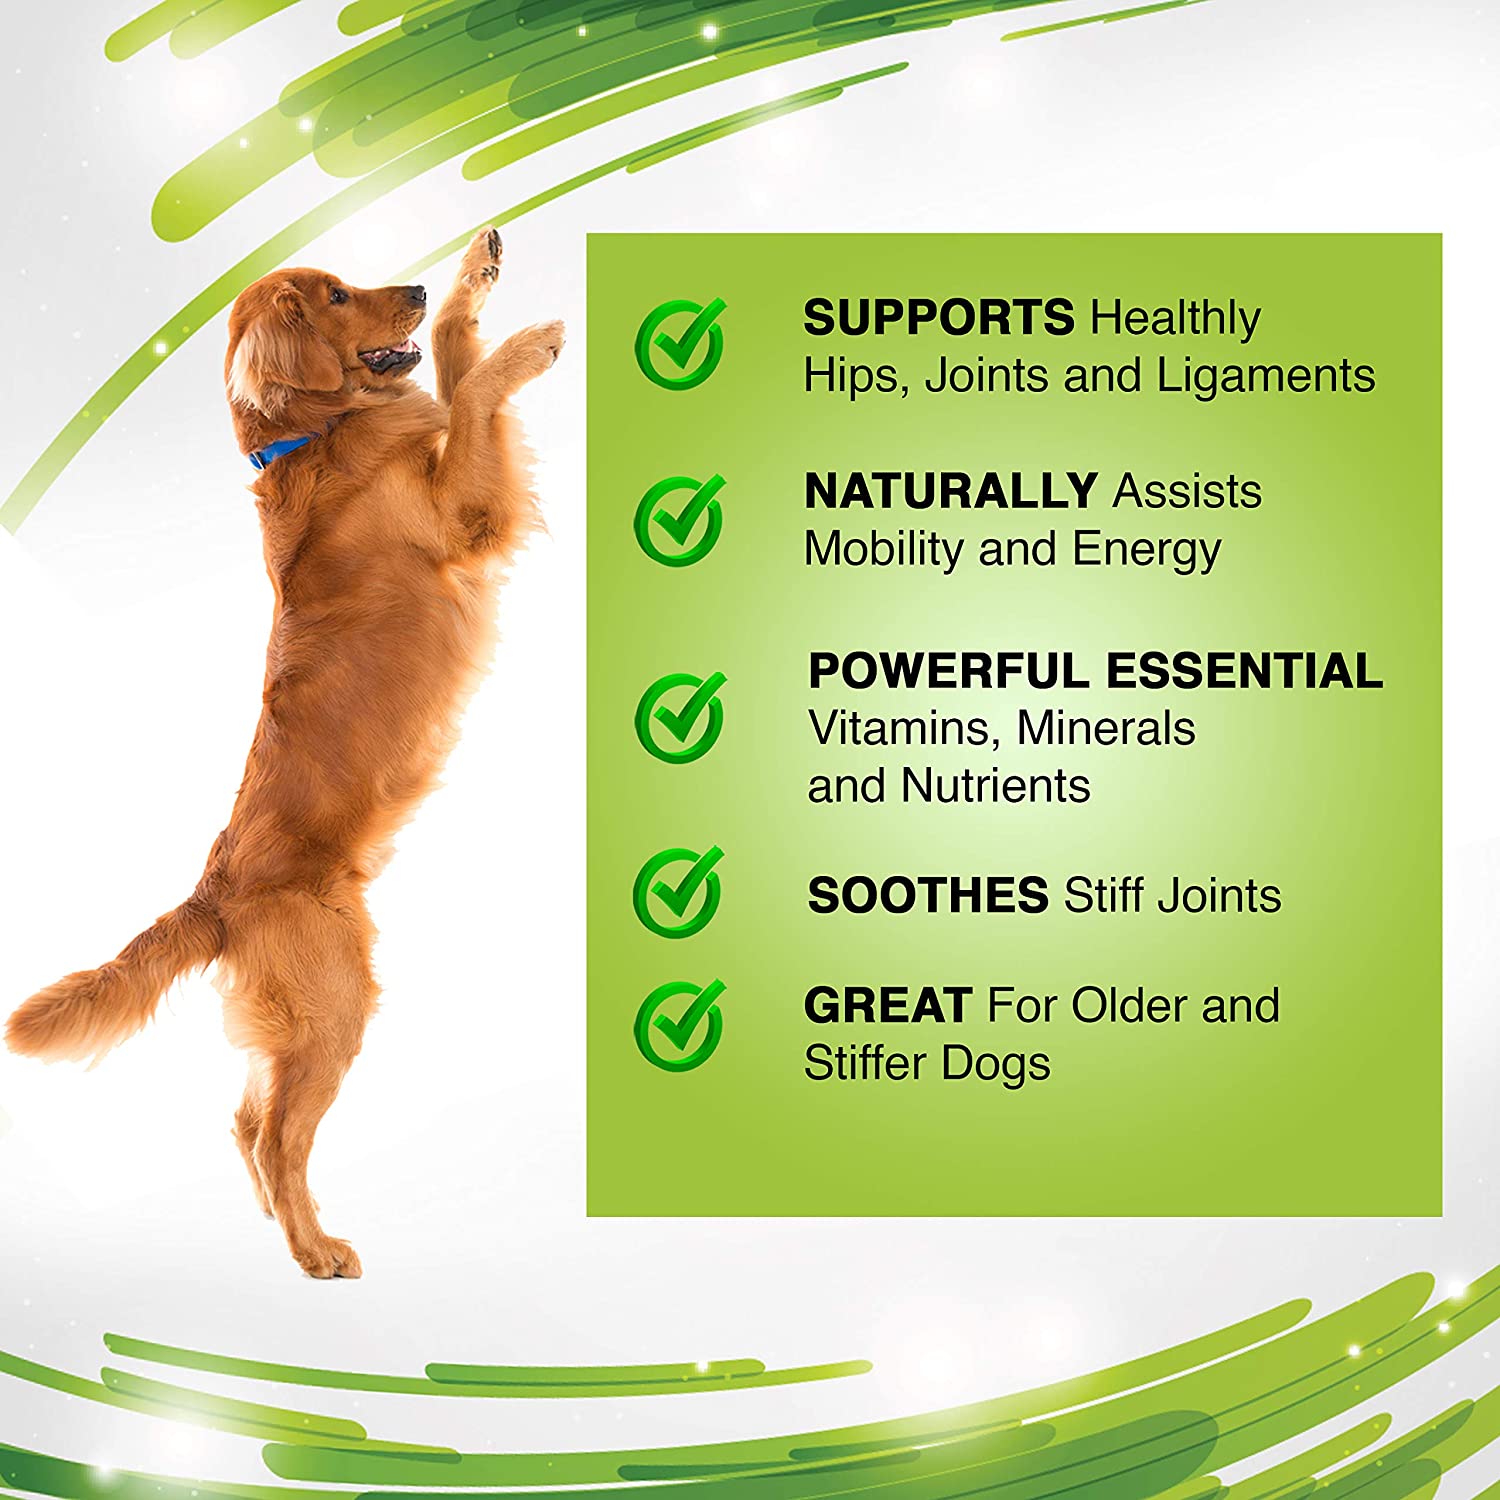  Advanced Hip and Joint Support Glucosamine for Dogs - Powerful Chondroitin, MSM, Curcumin & Green Lipped Mussel Dog Joint Supplement - with Vitamins E & C, 120 Tablets, Made in UK 